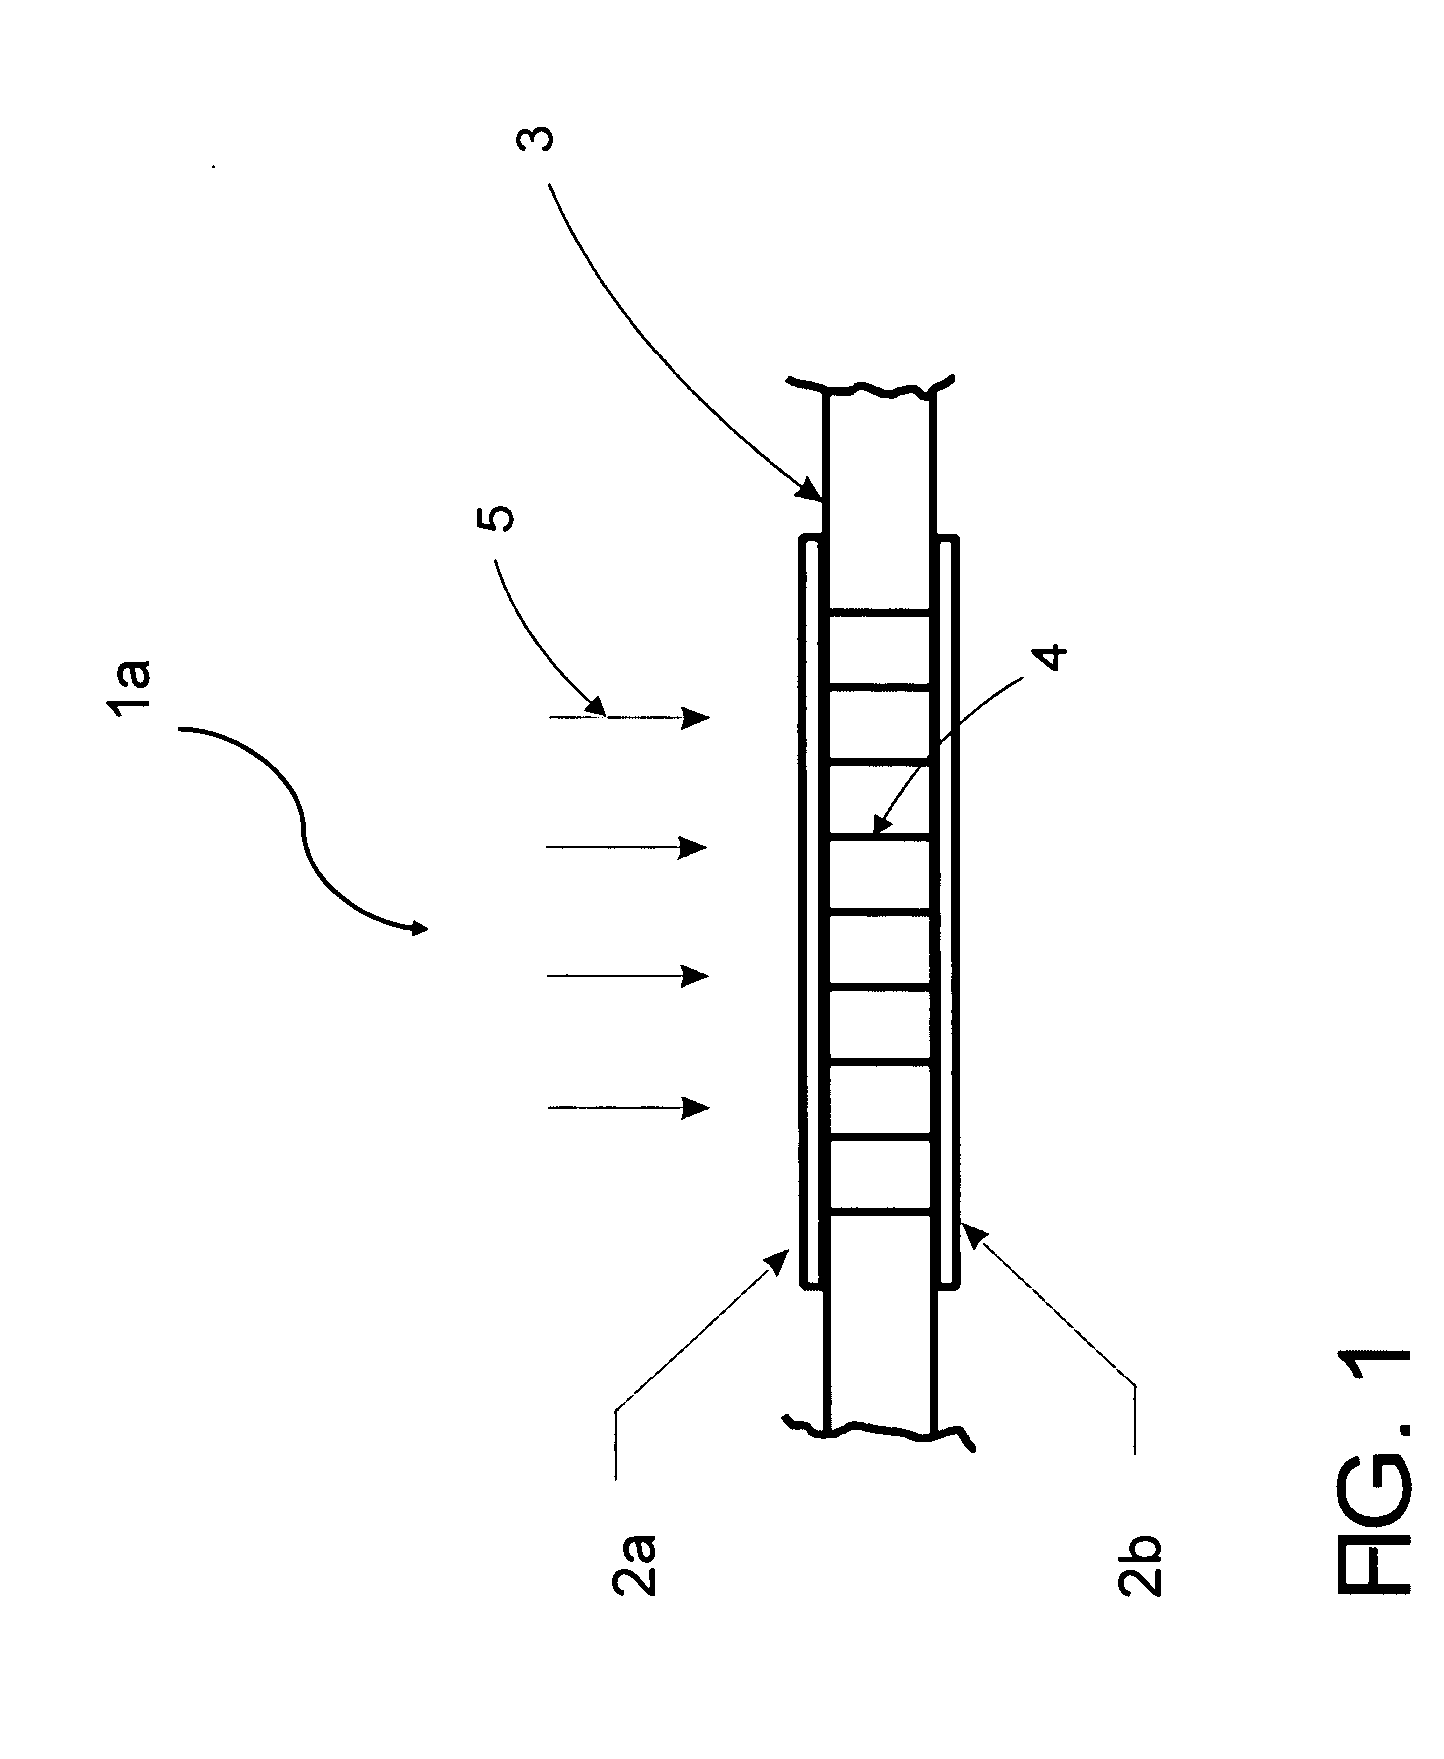 Charge carrier flow apparatus and methods